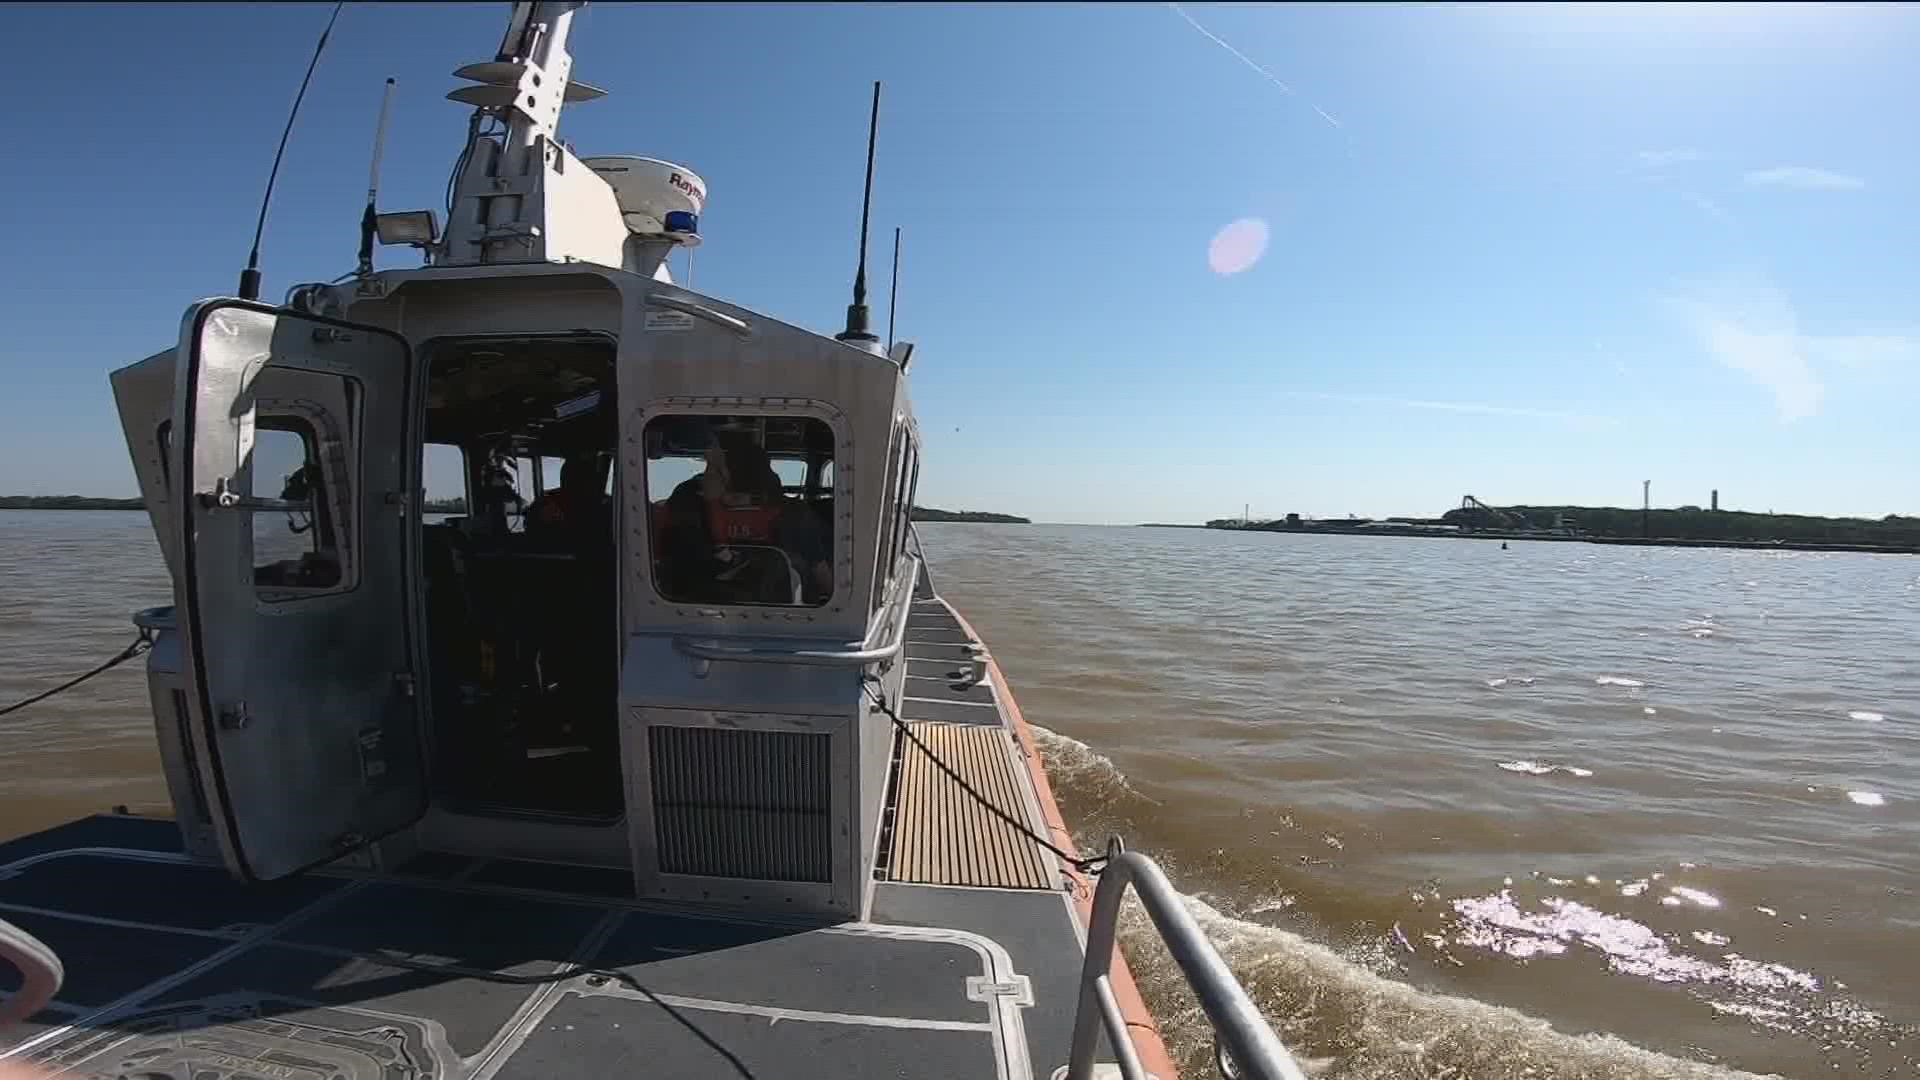 WTOL 11 caught up with the U.S. Coast Guard Toledo Station to hear what they want boaters to know as summer kicks off.